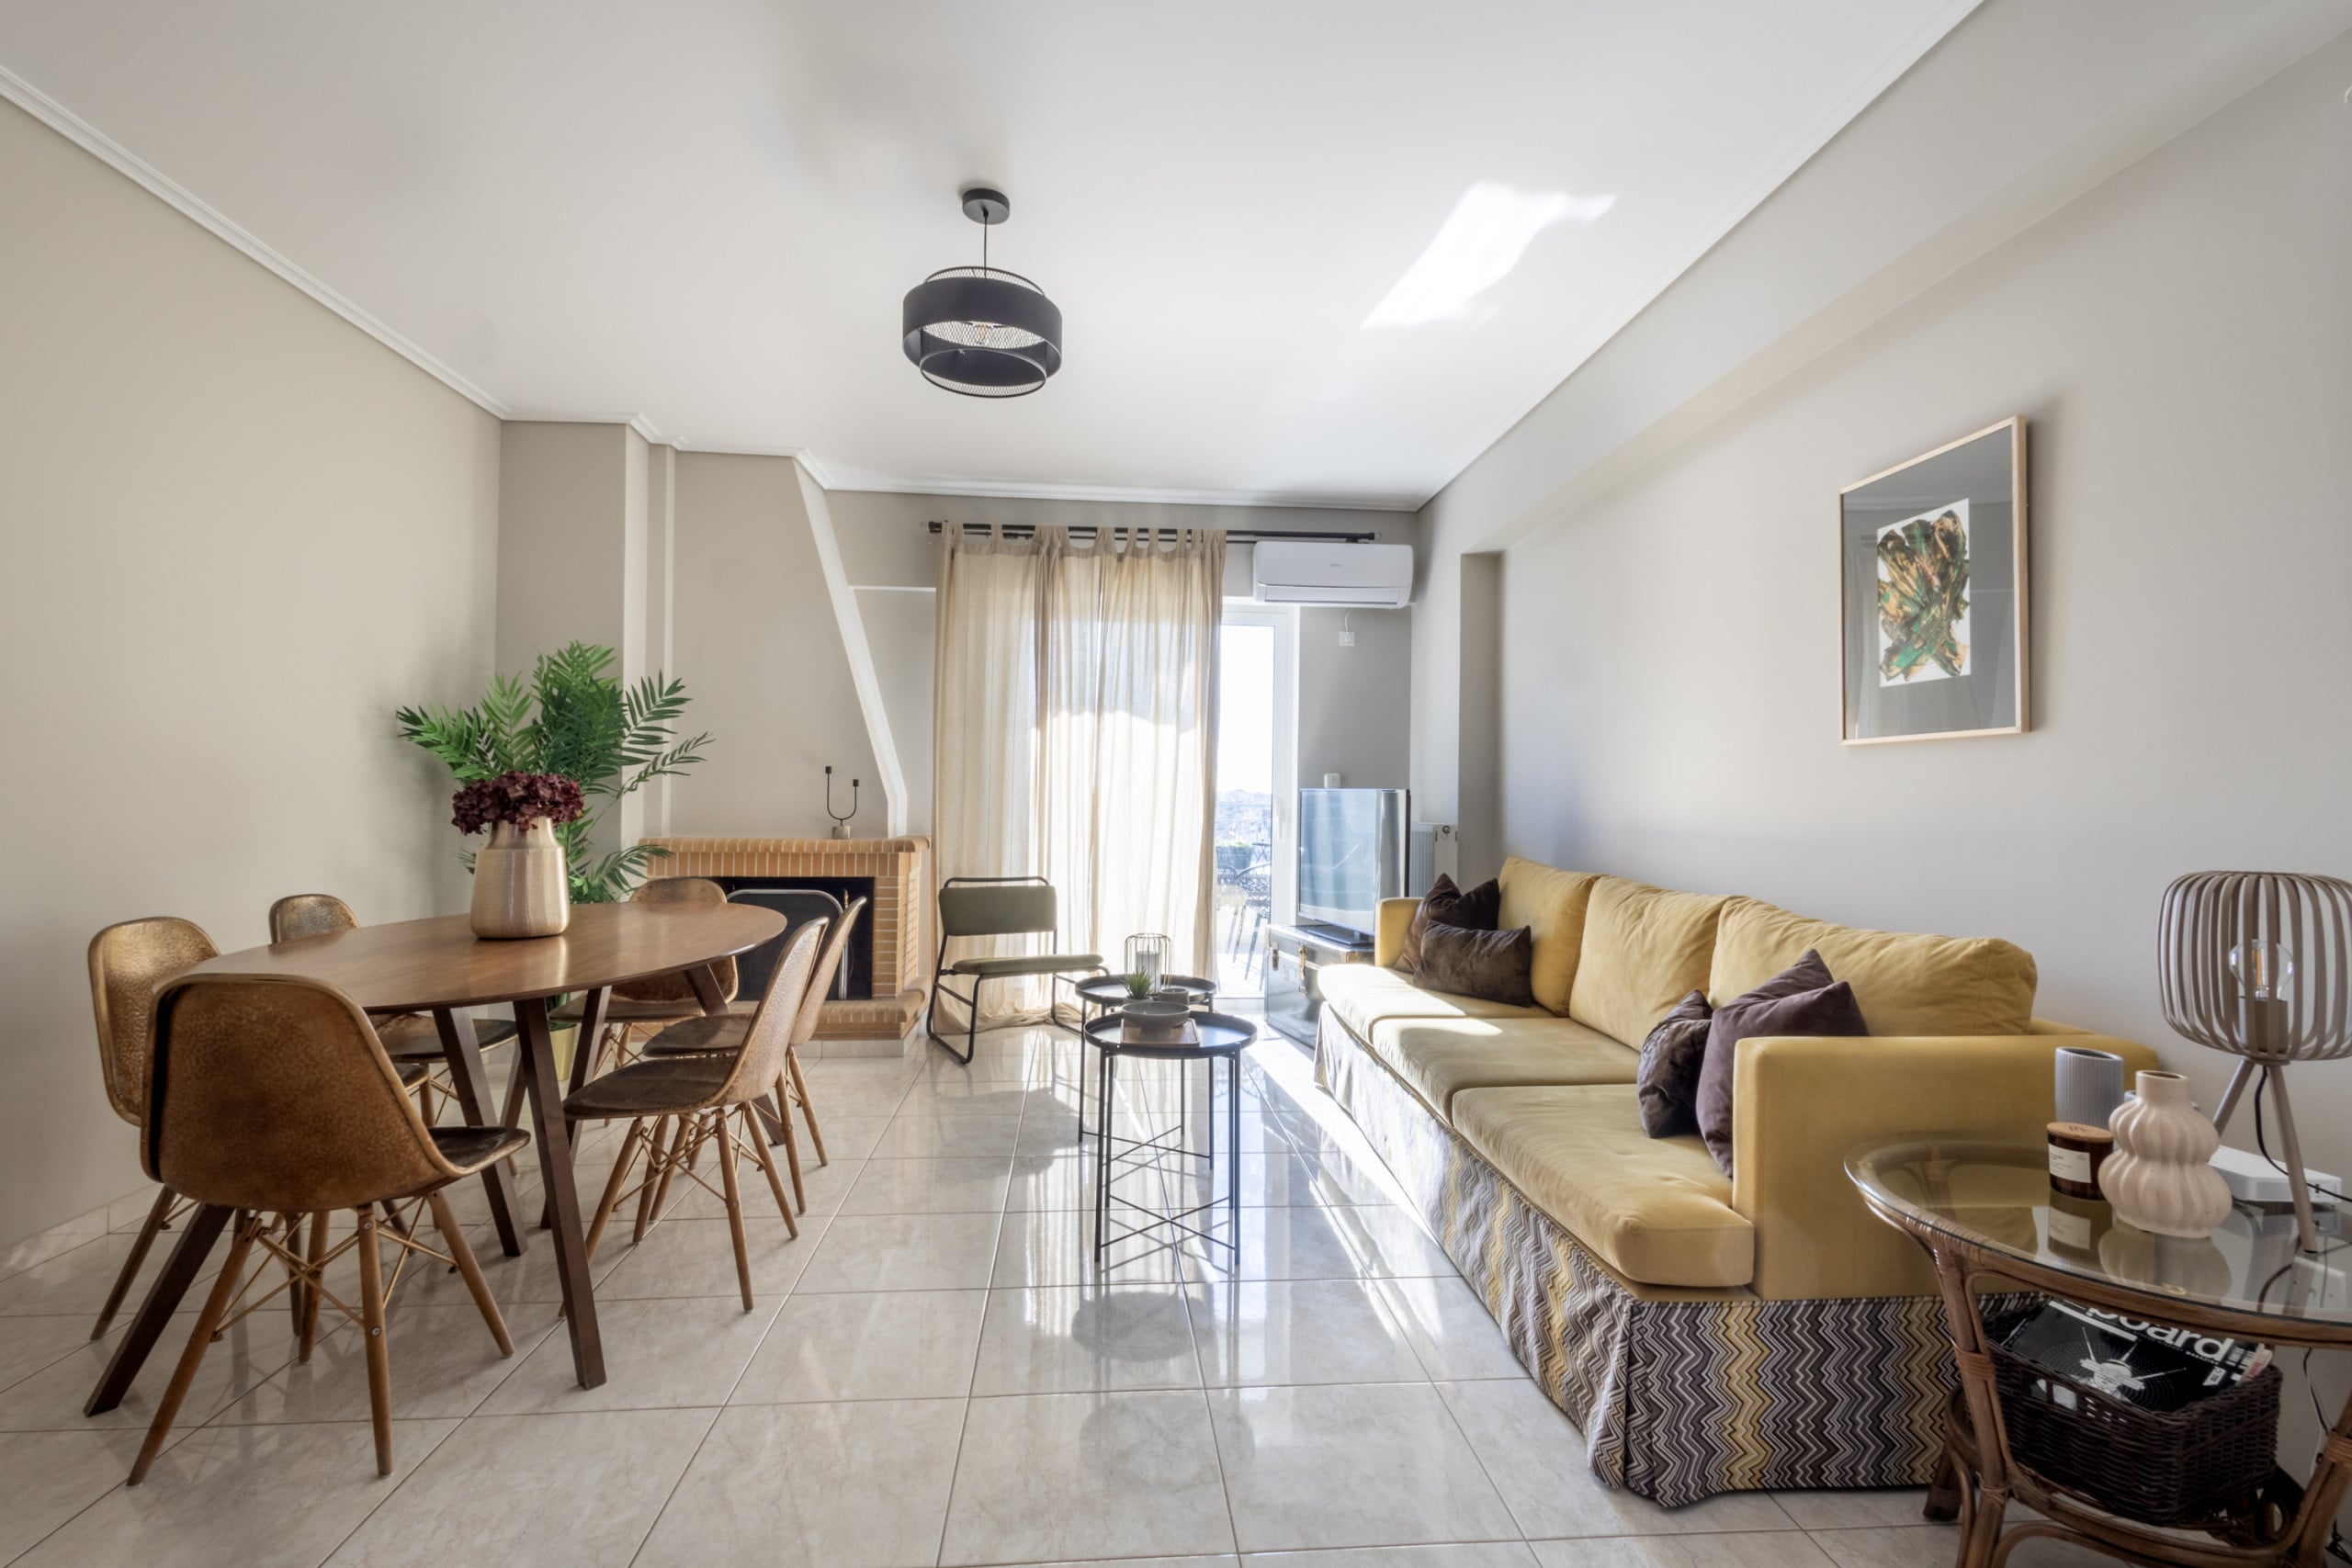 Property Image 1 - Renovated Elegant Apartment with Balcony and Stunning Acropolis Views